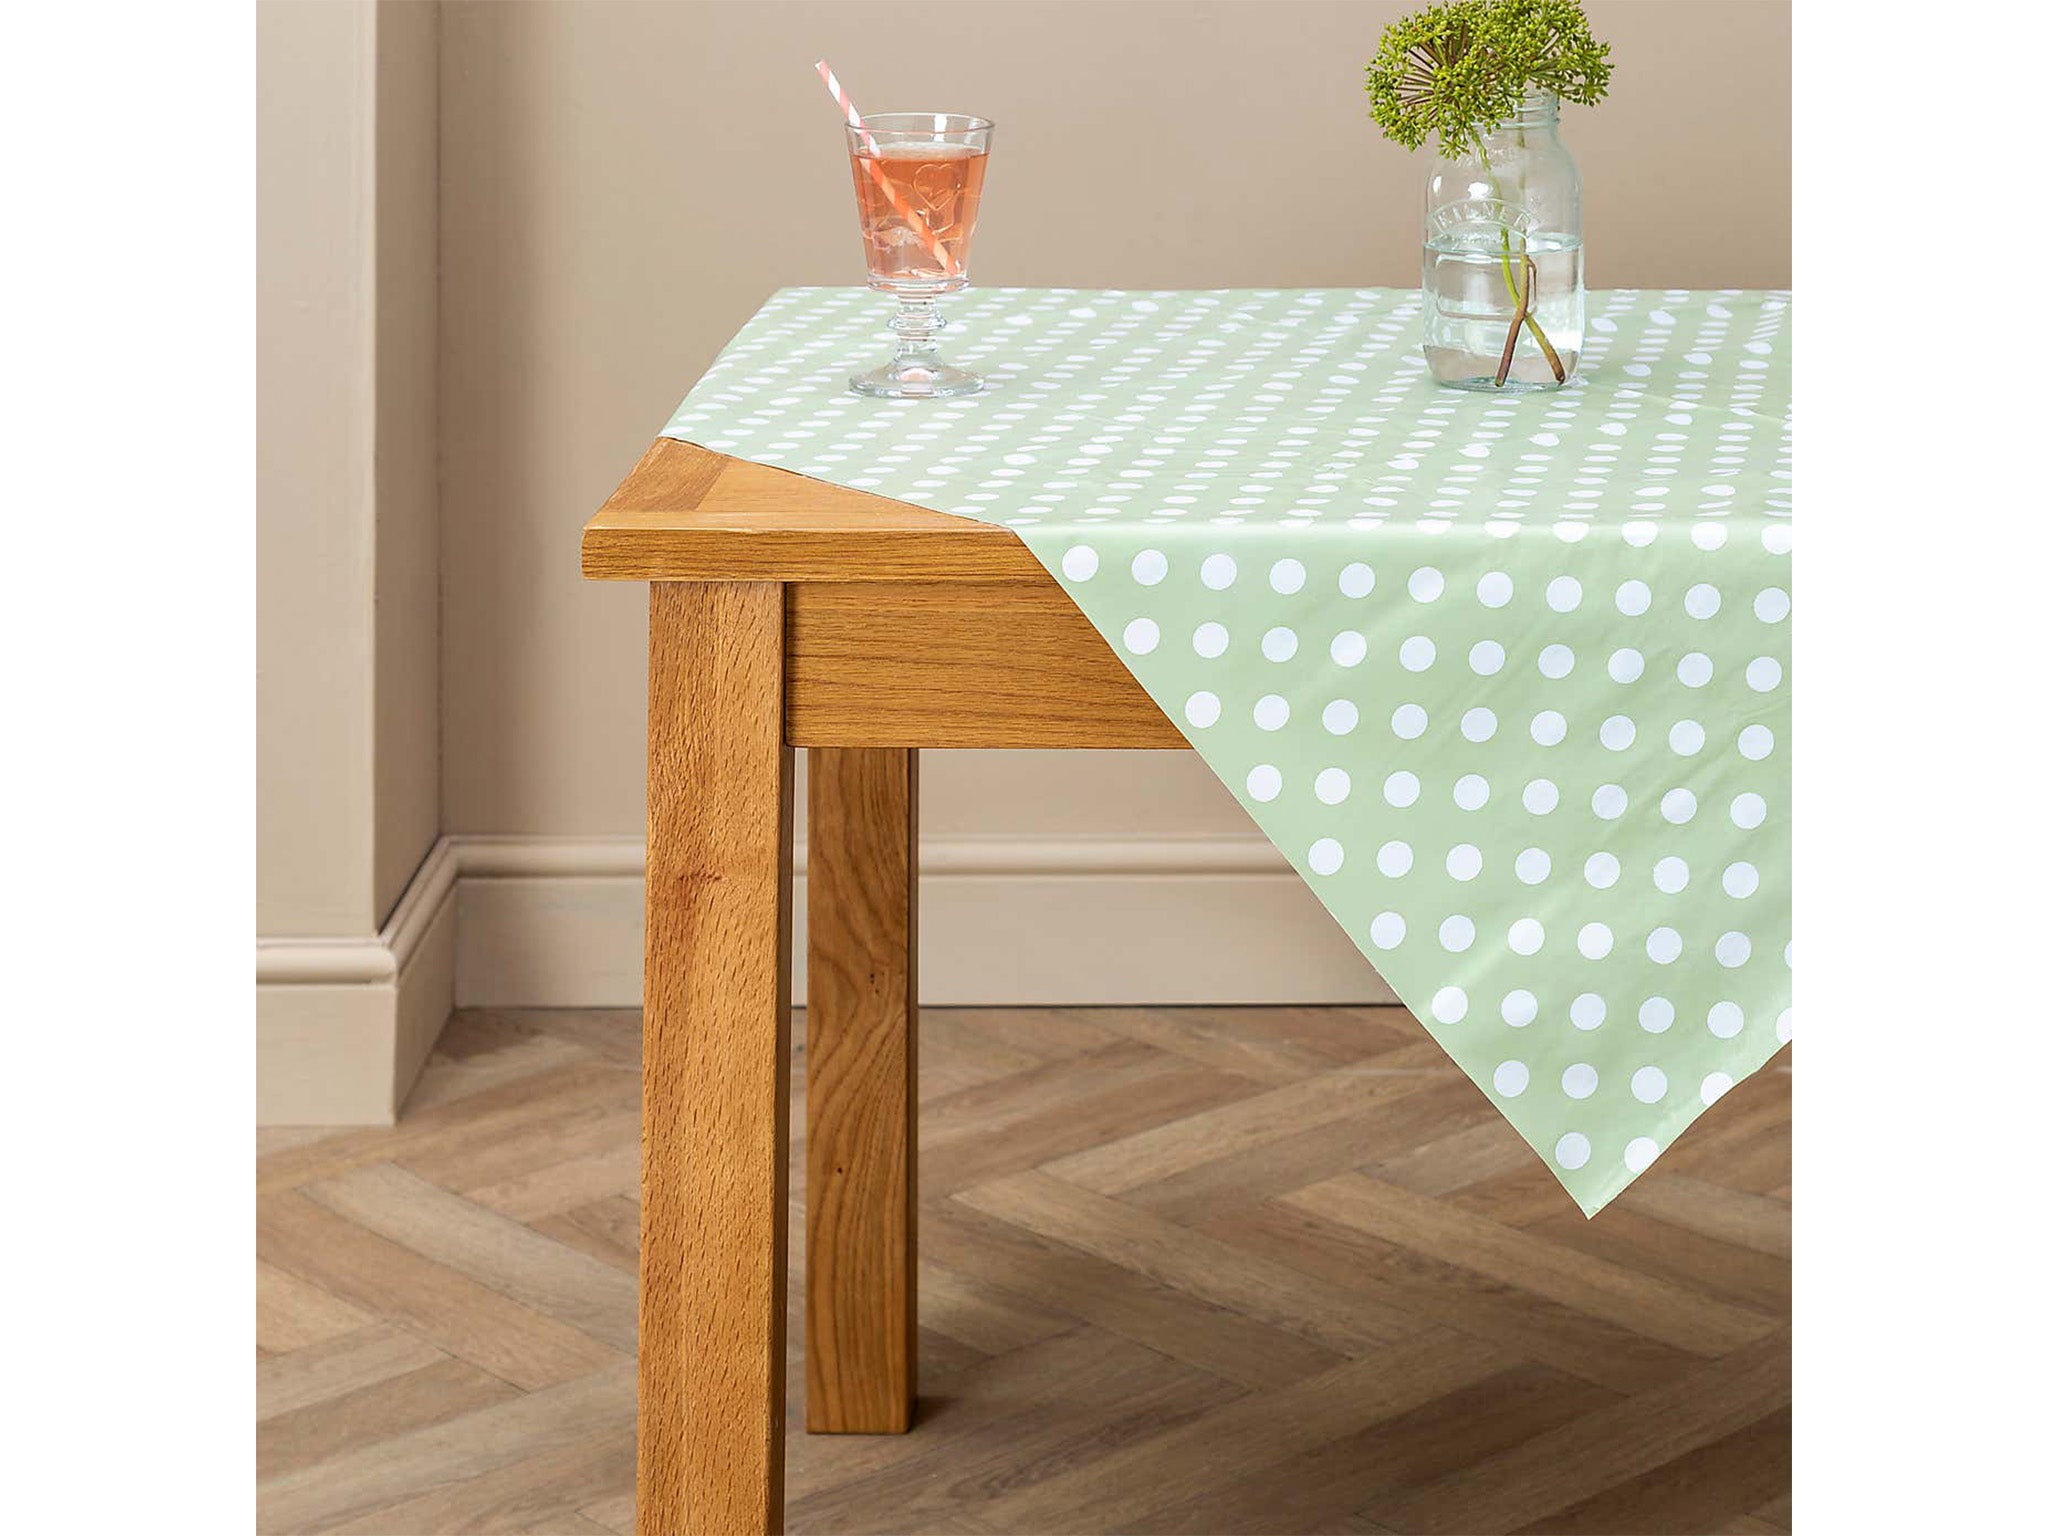 Set the table as you would at home with a tablecloth